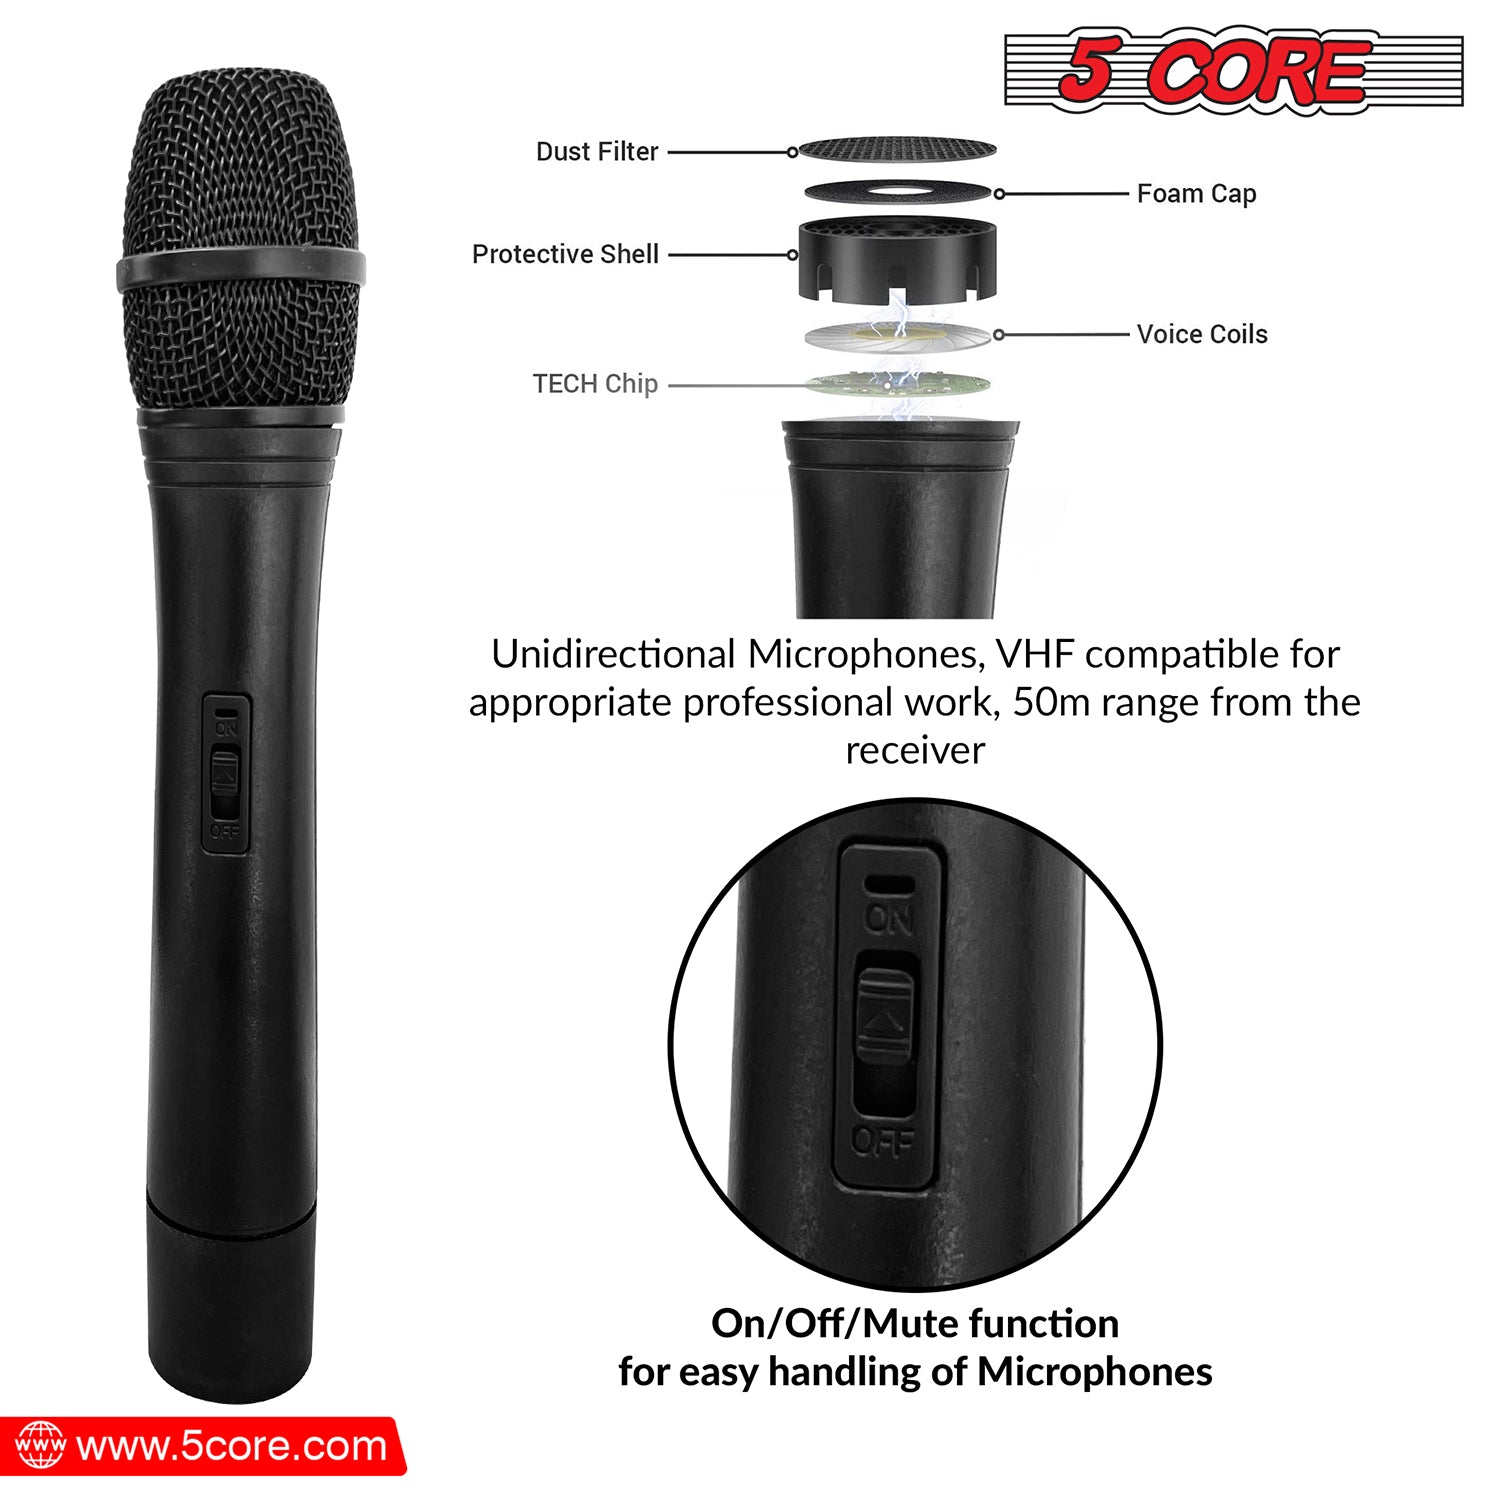 5 Core Professional Wireless Microphone System VHF Fixed Dual Frequency Microfono Inalambrico 100FT Range 2 Handheld Mics